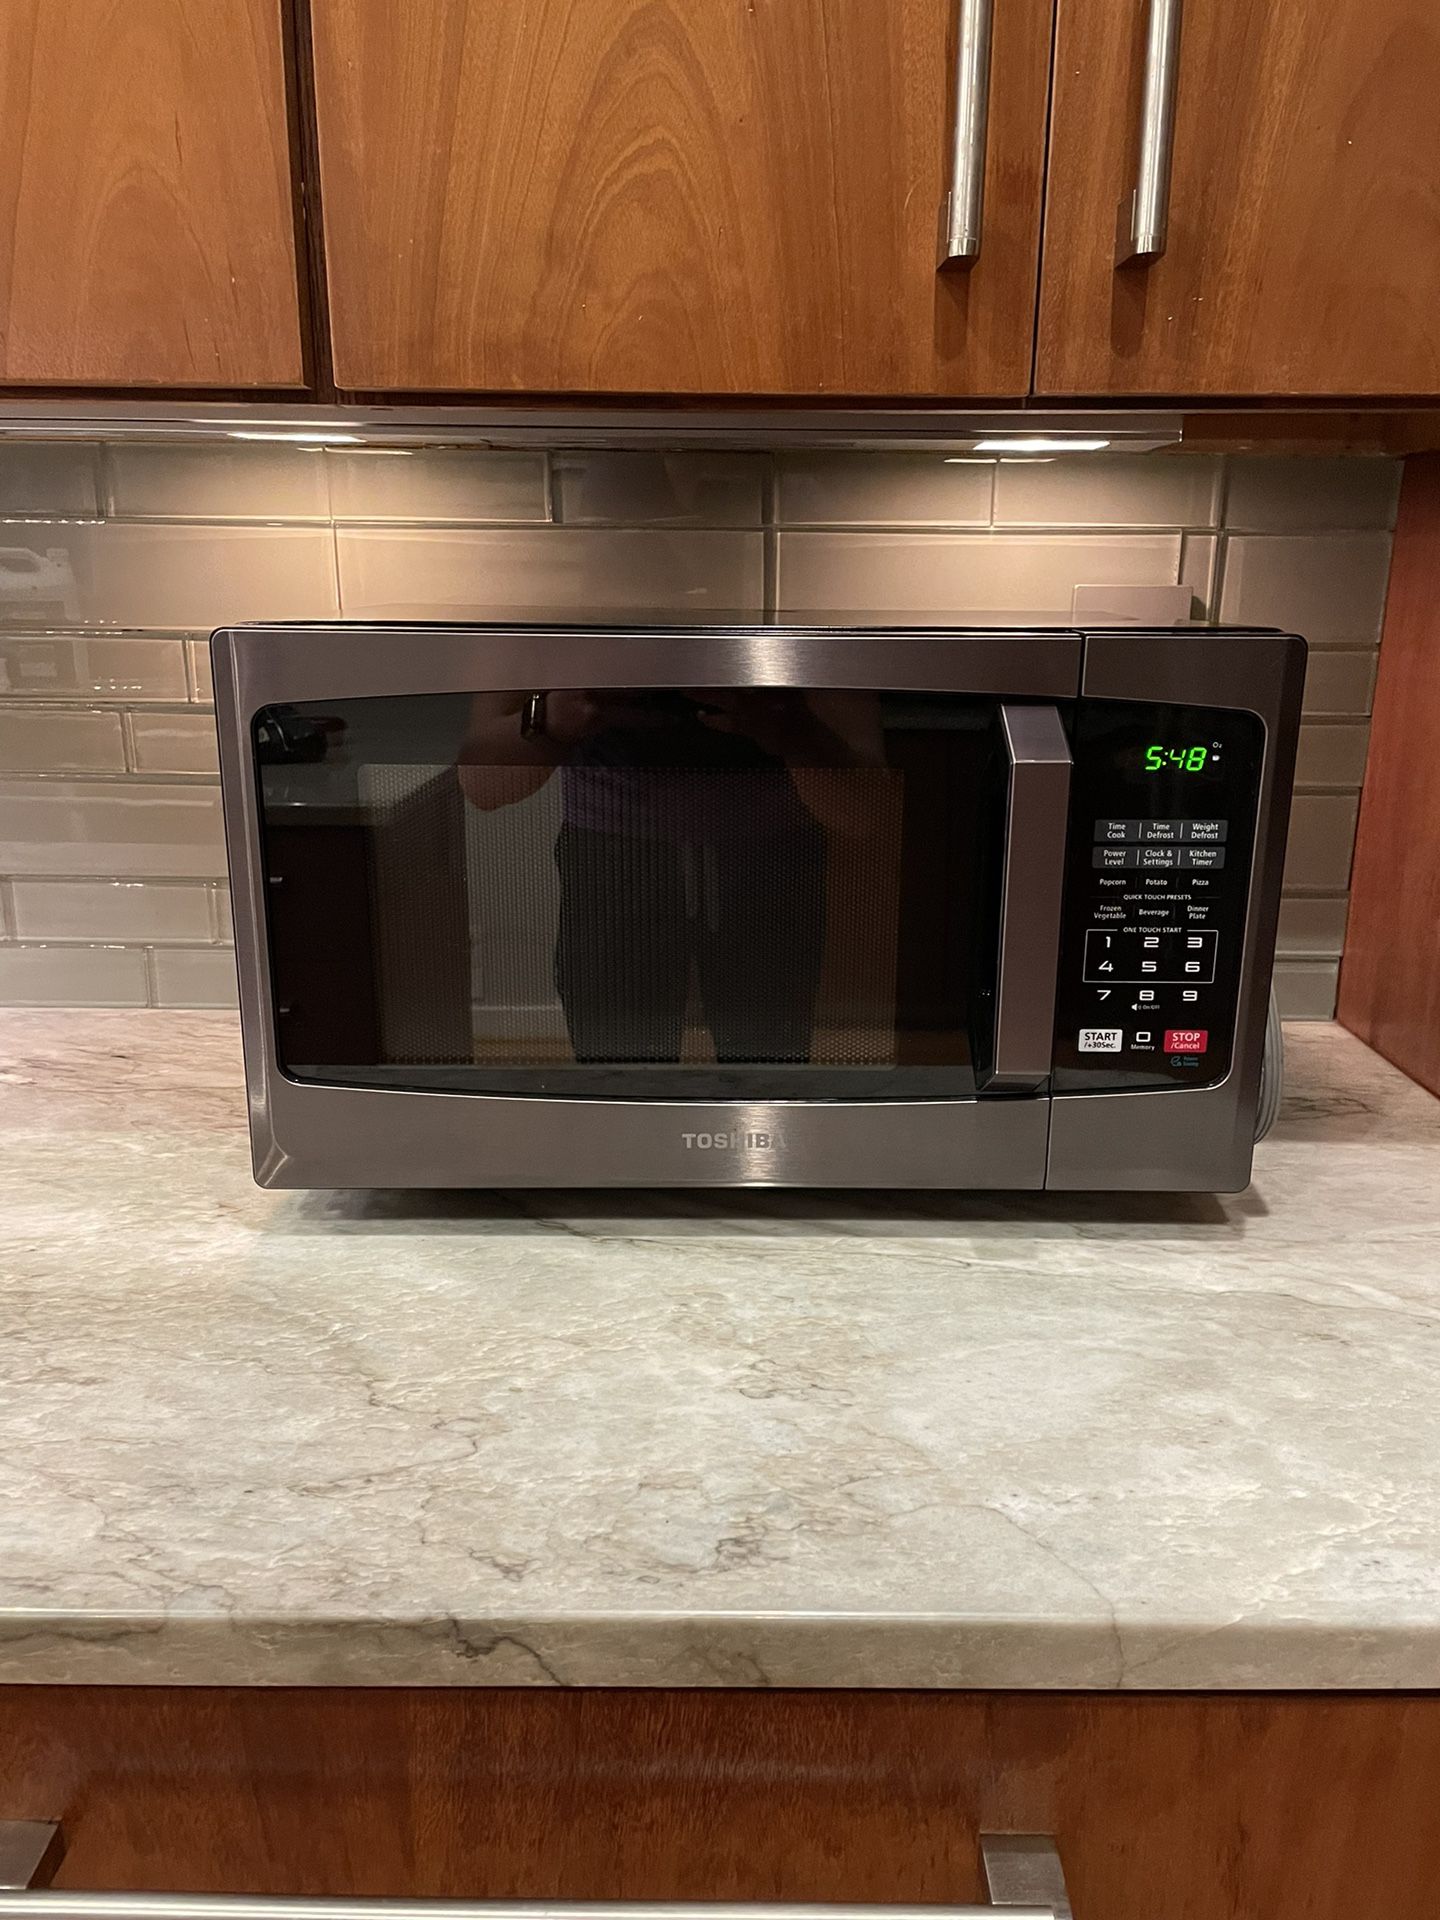 TOSHIBA Countertop Microwave Oven, 0.9 Cu Ft with Removable Turntable, 900W, 6 Auto Menus, Mute Function & ECO Mode, Child Lock, Black Stainless Steel